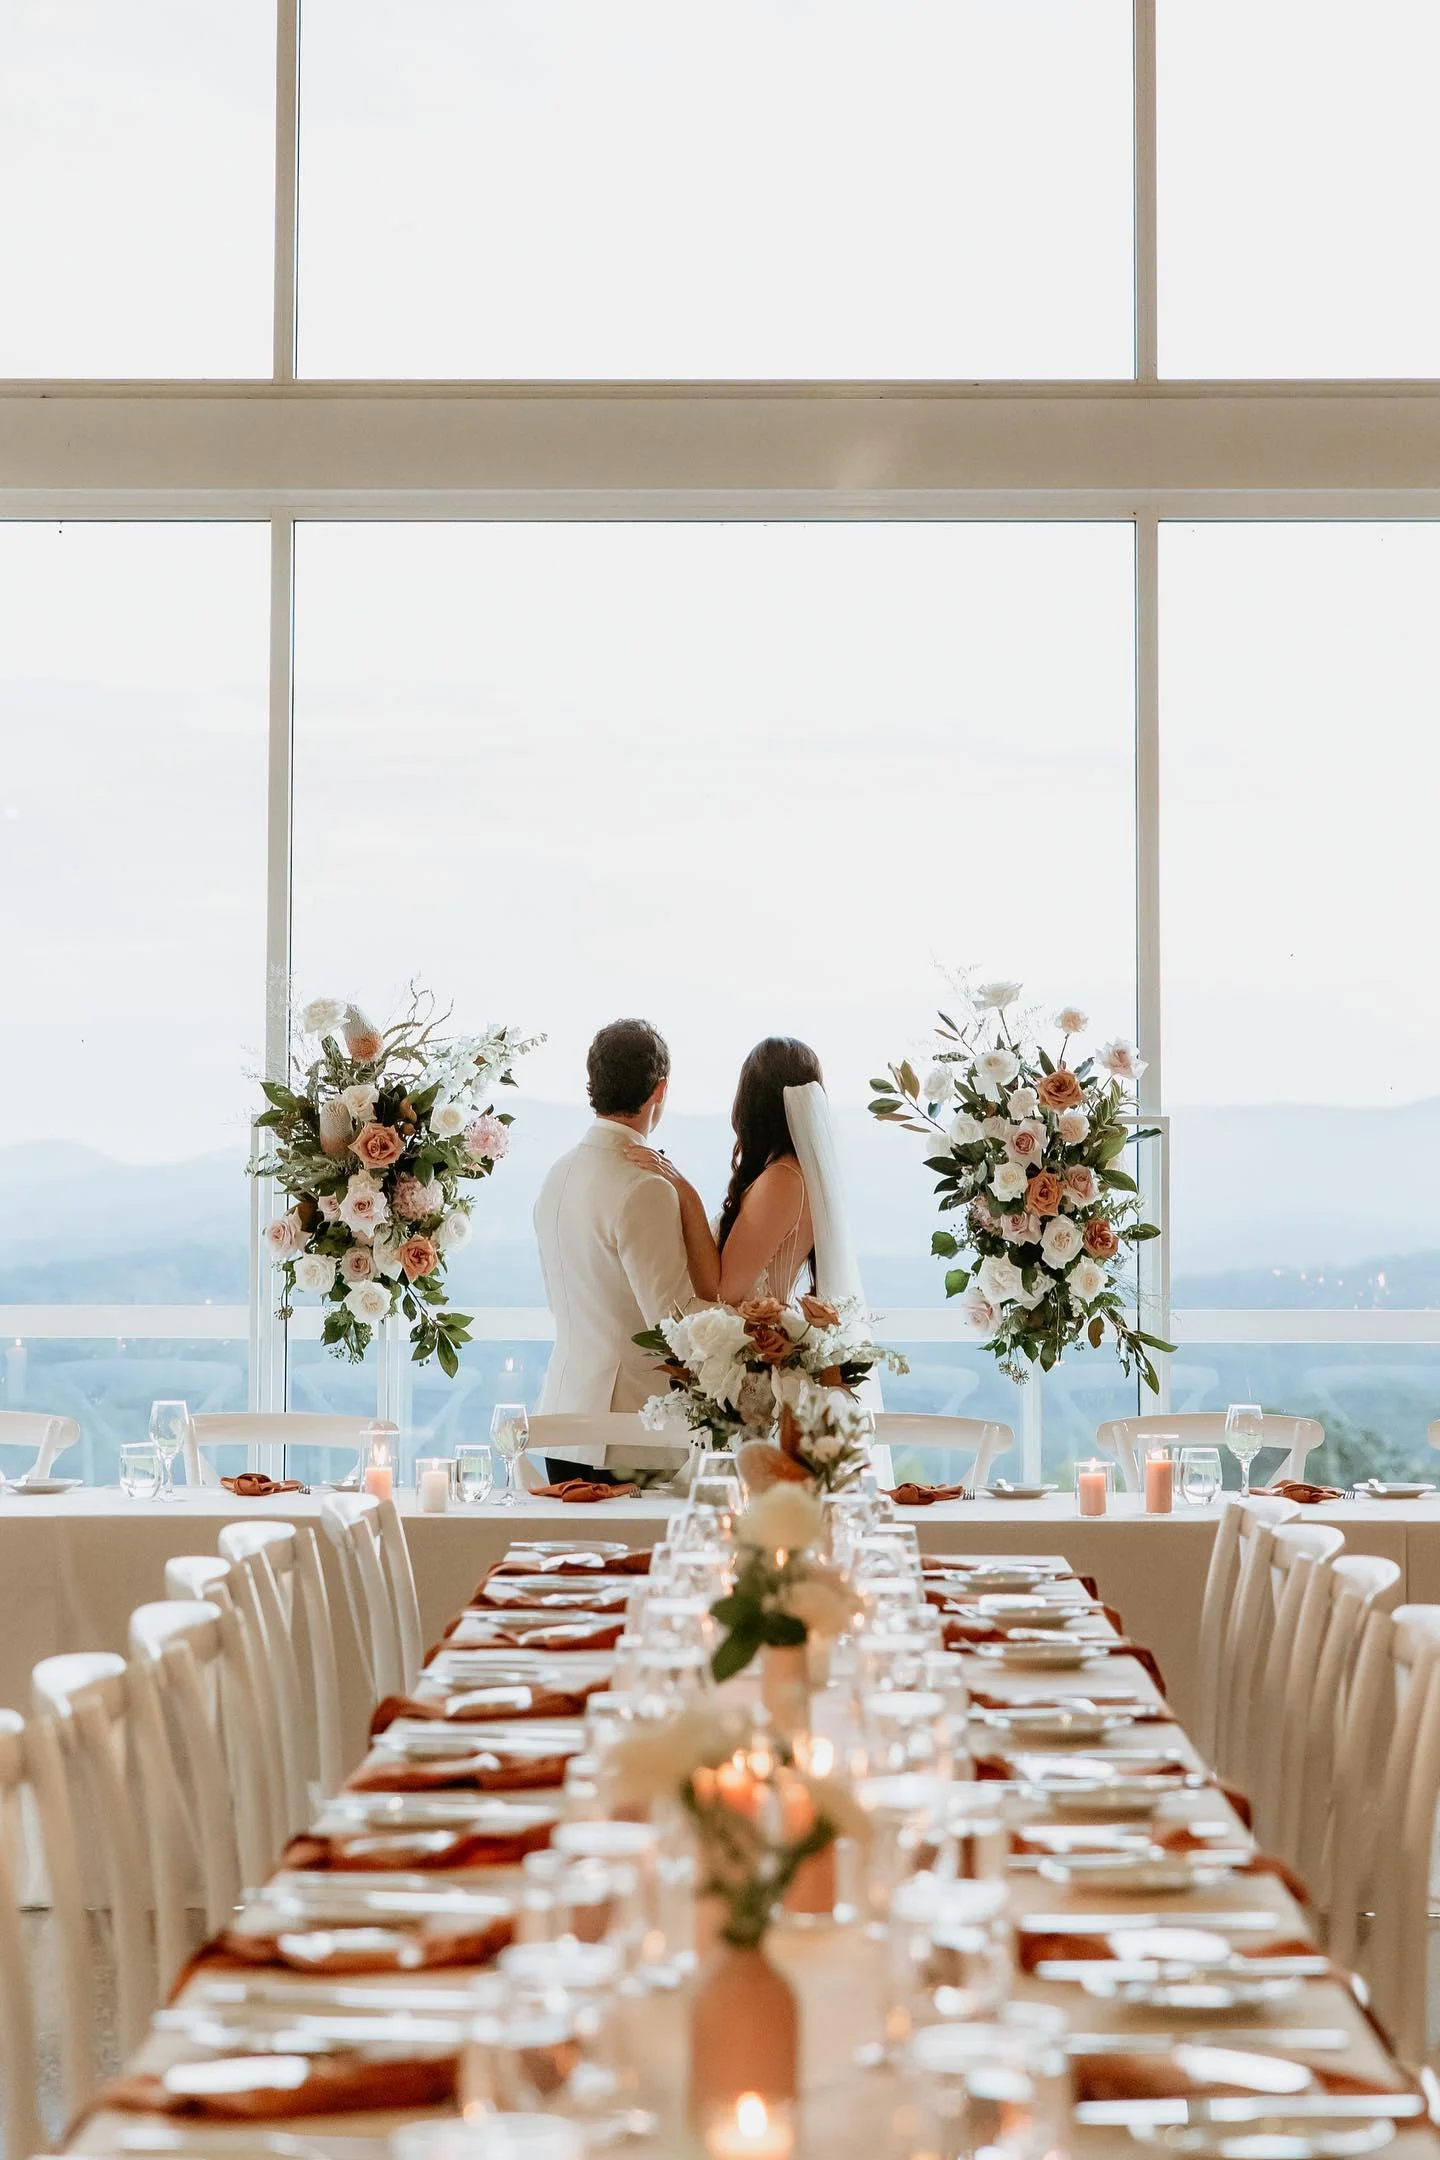 destination-wedding-venues-in-australia-The-Old-Dairy-Maleny-Queensland-image-Danielle-Webster-Photo-5